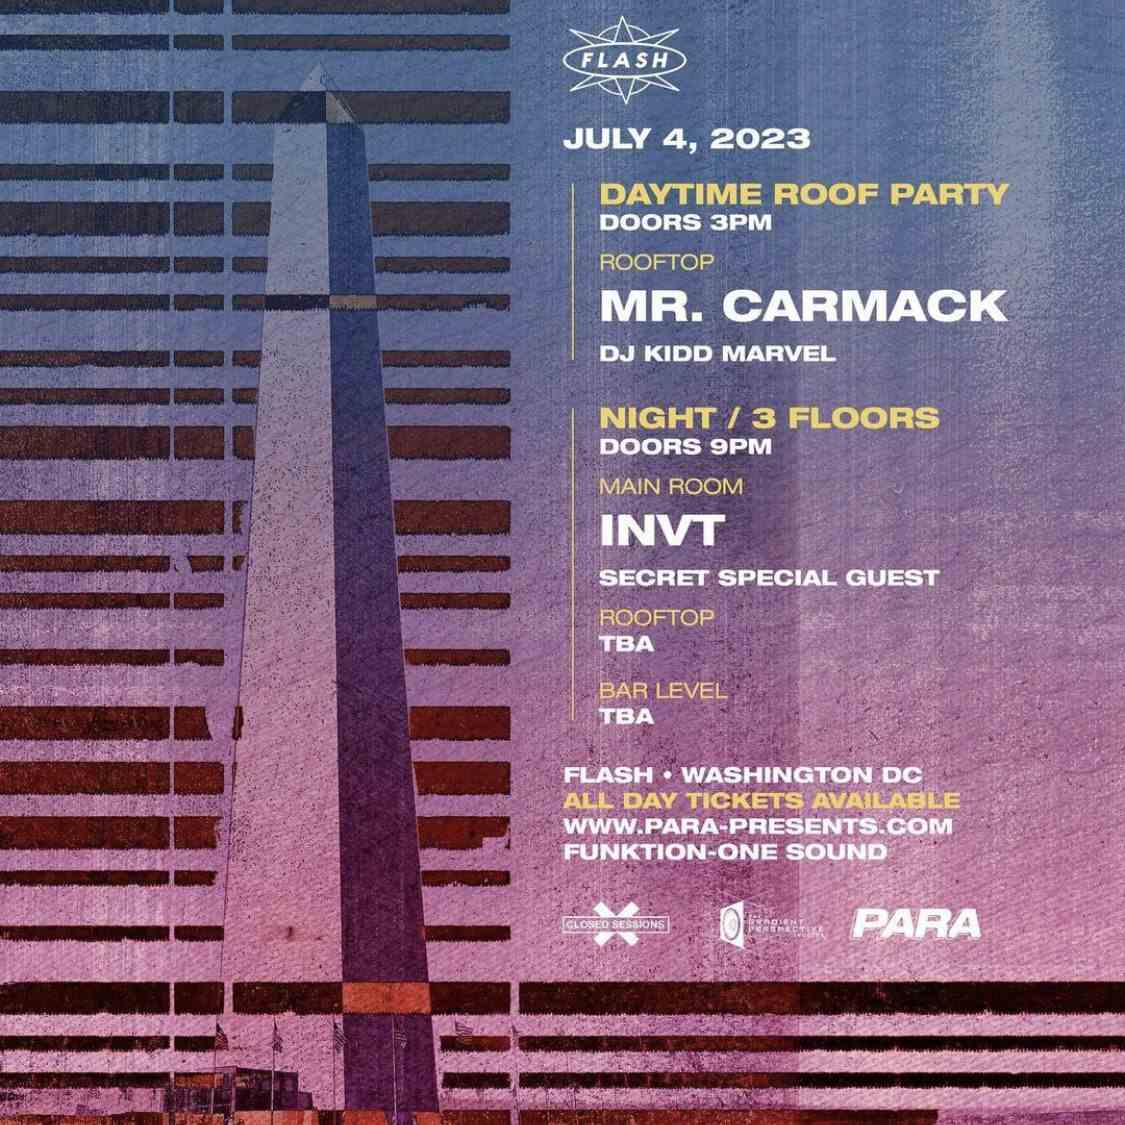 Event image for July 4th @ Flash (Mr. Carmack, INVT, and more)